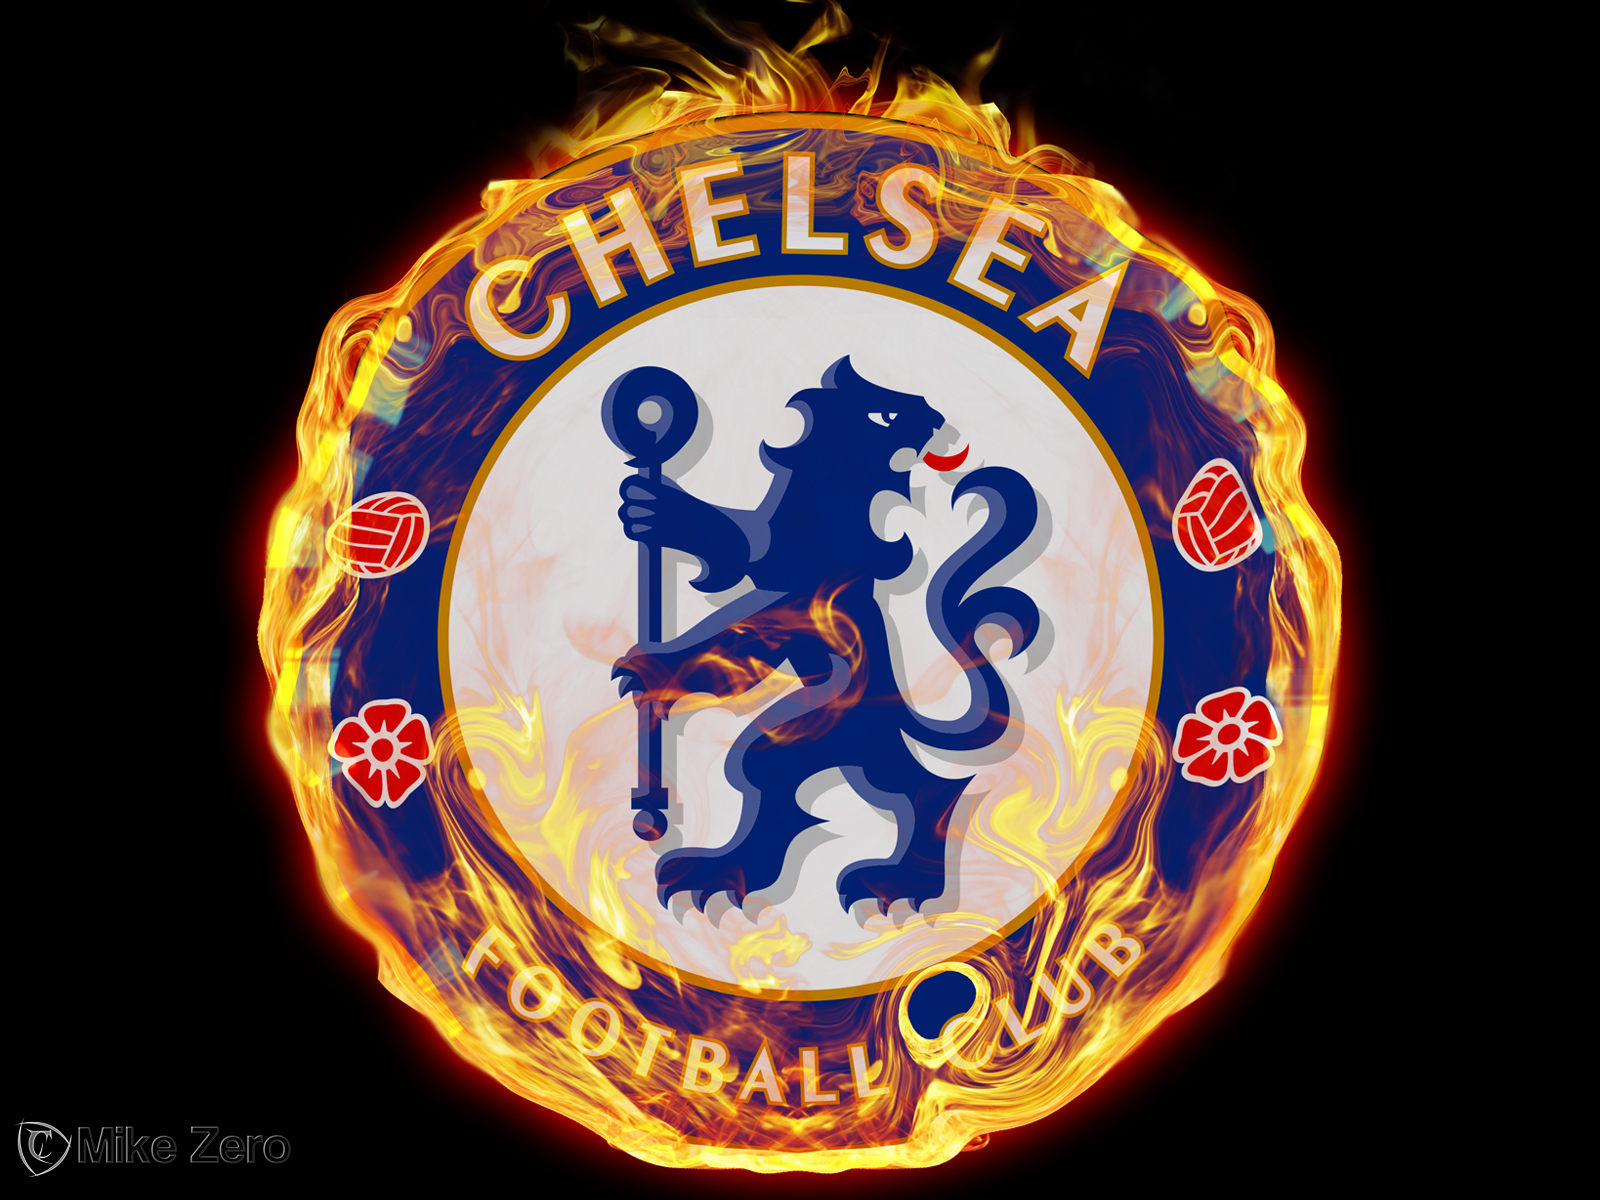 Chelsea FC Logo 2012 - 2013 | Wallpapers Pictures